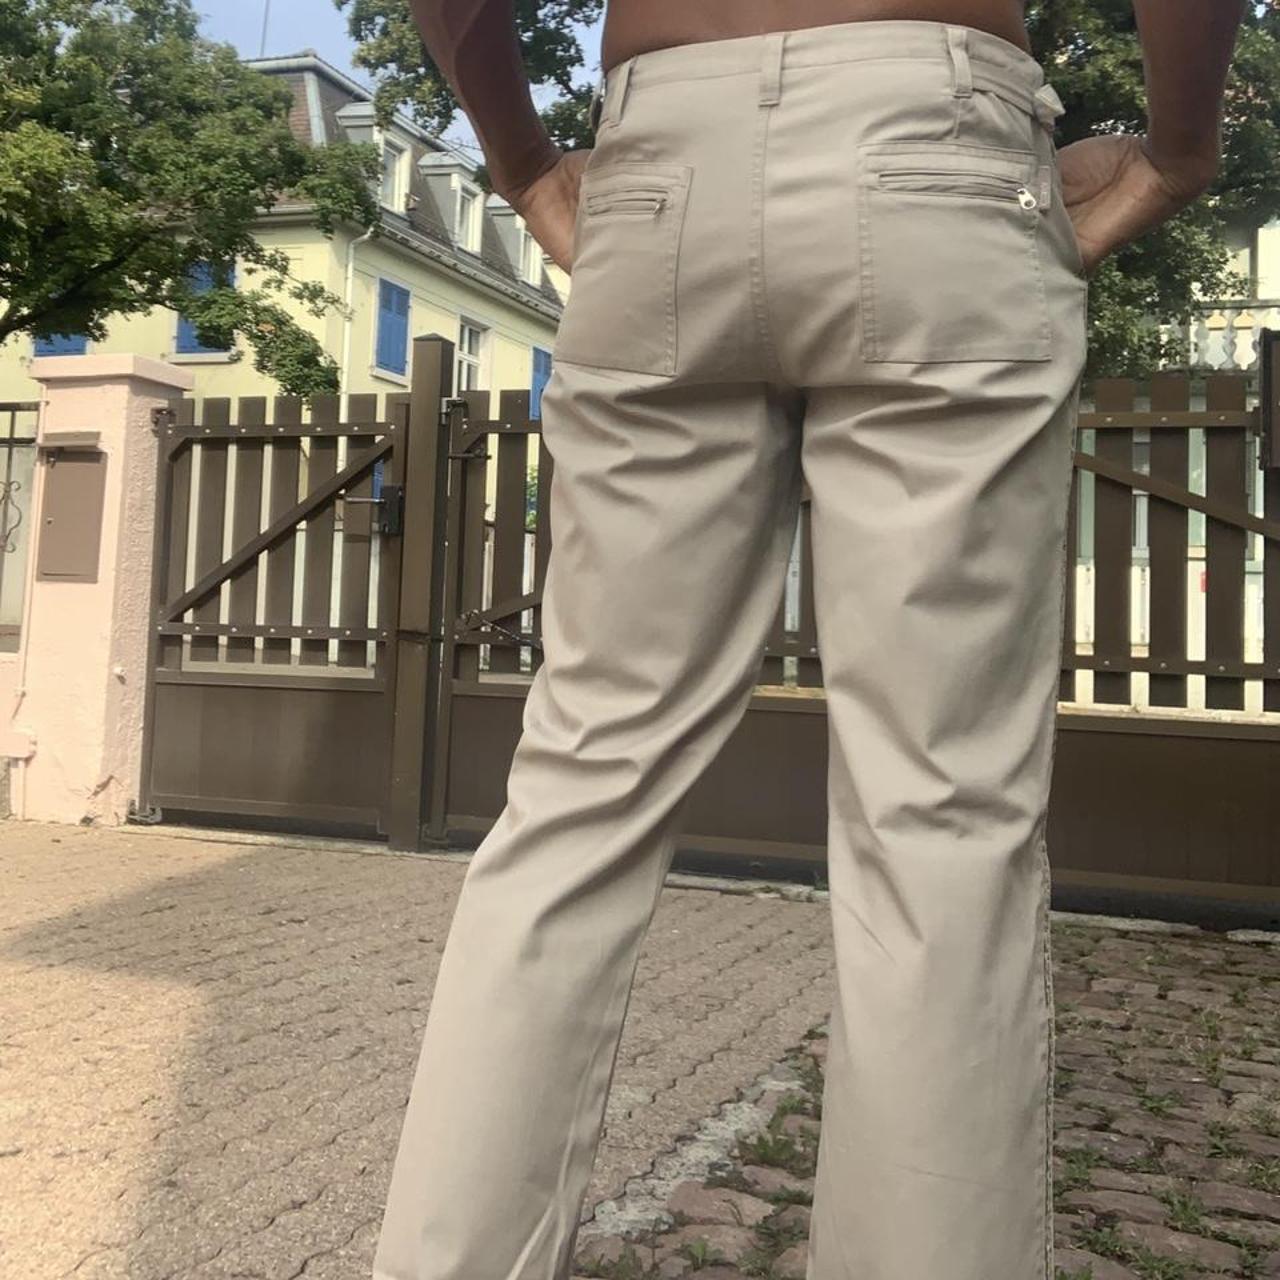 Product Image 2 - Vintage trousers beige .

WELCOME DEPOP